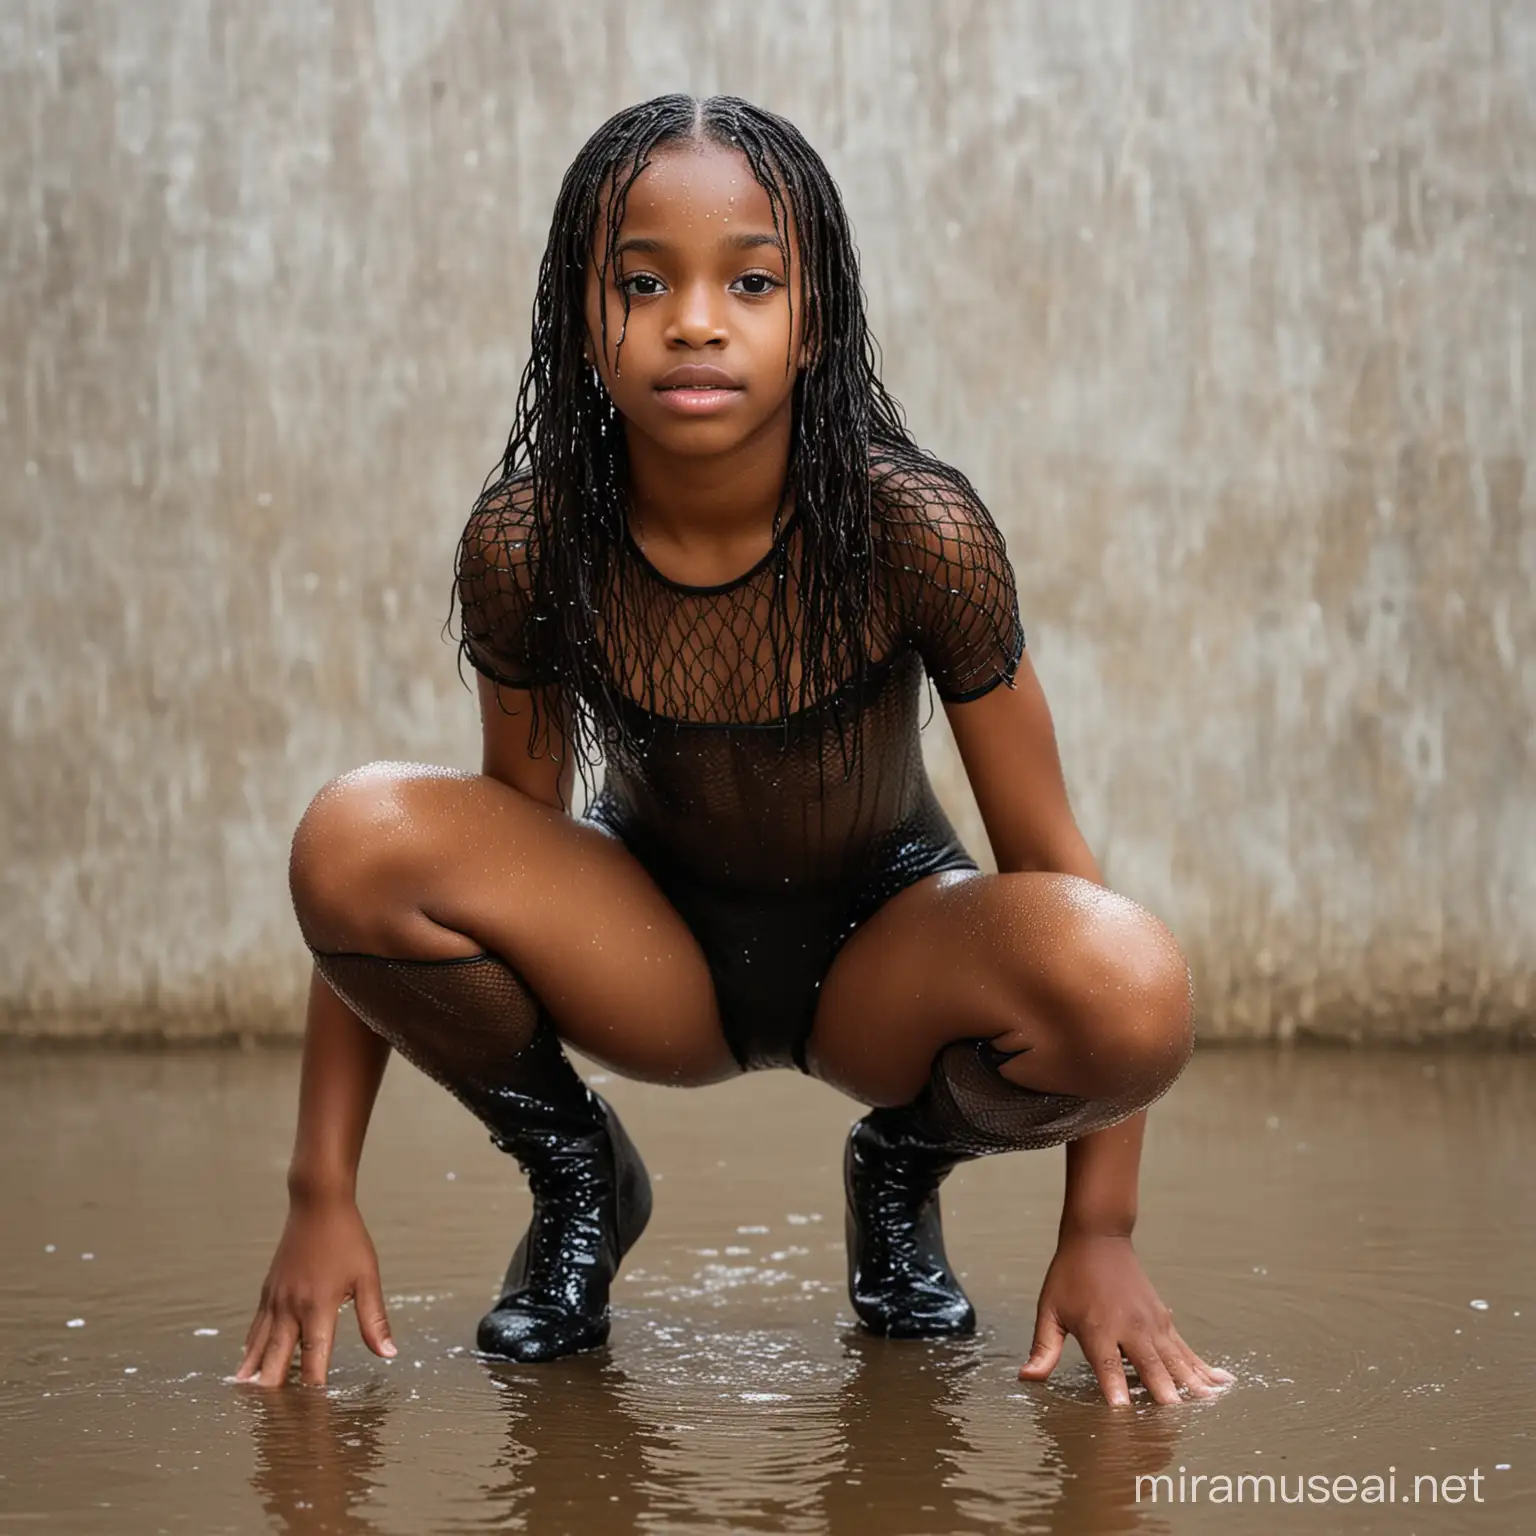 African American Girl Posing in Rain with Wet Hair and Fishnet Leotard